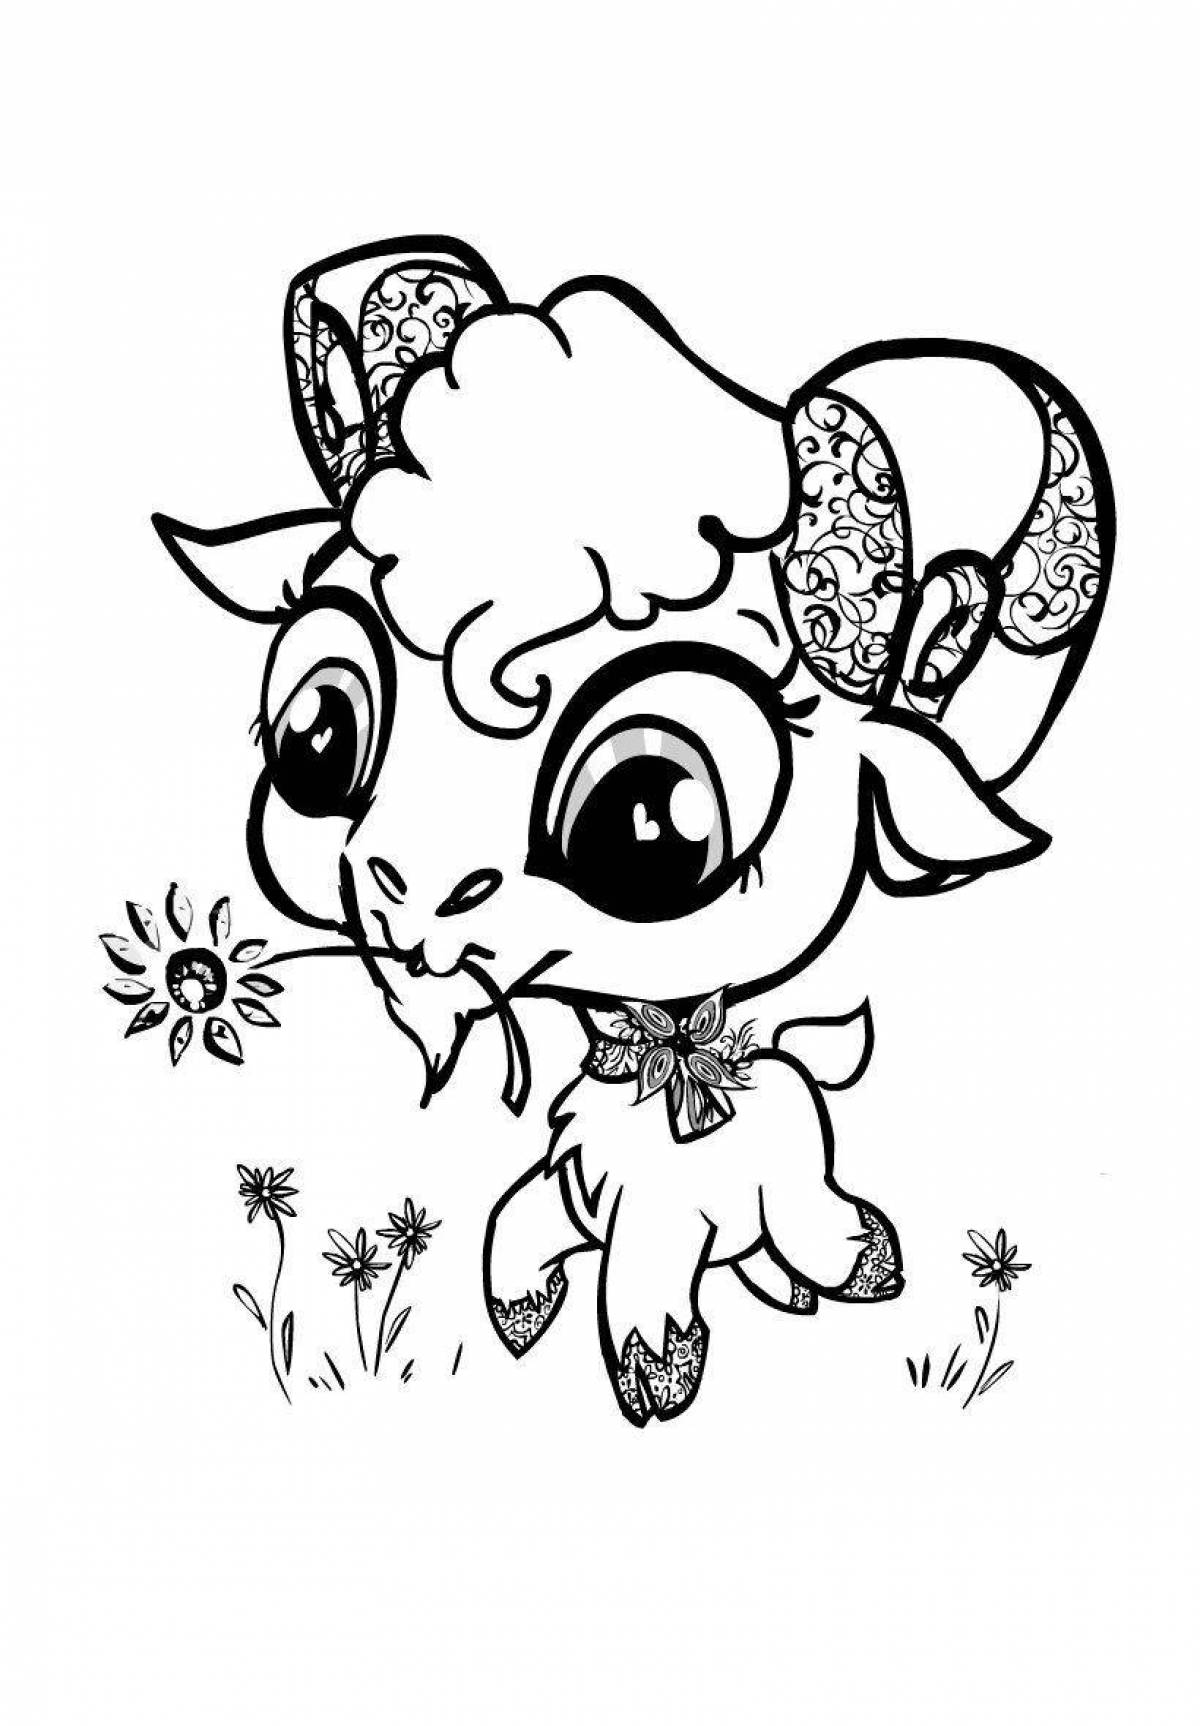 Sky animal coloring book for girls